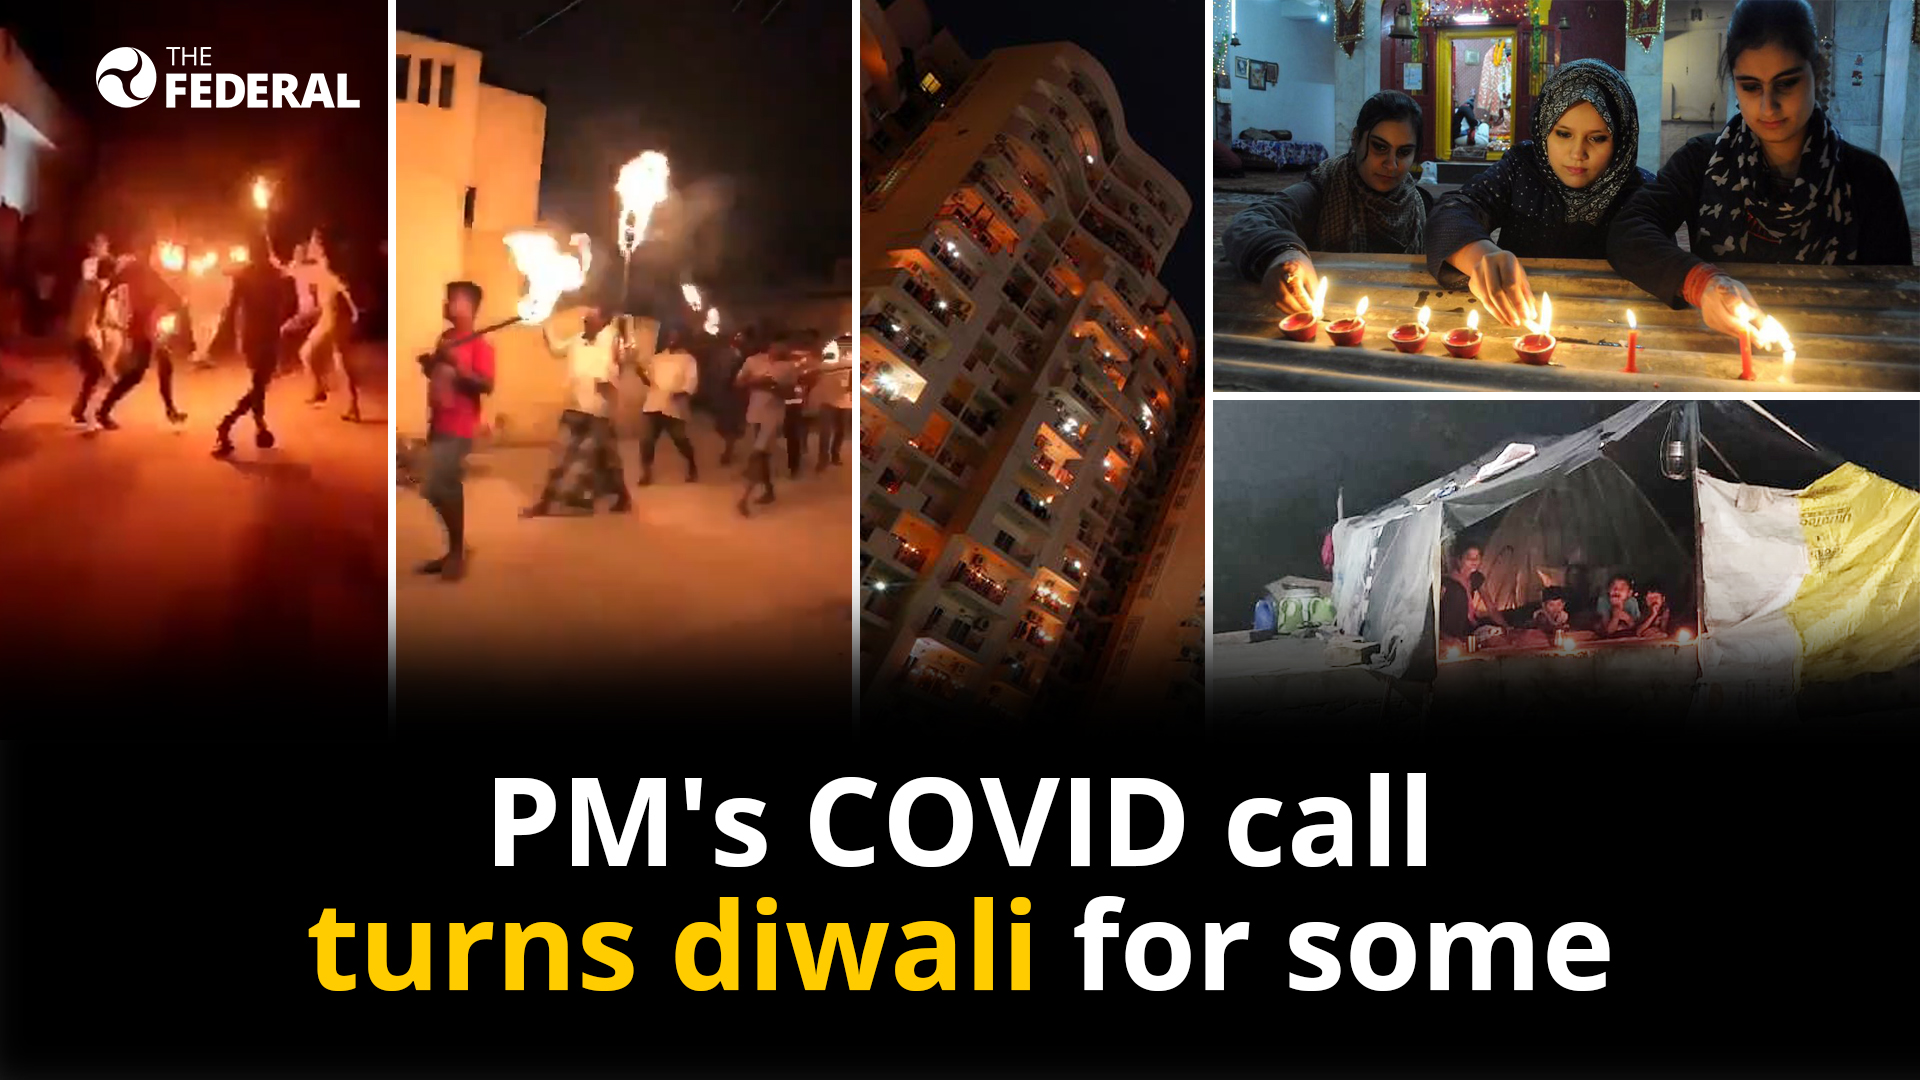 PMs COVID call turns diwali for some